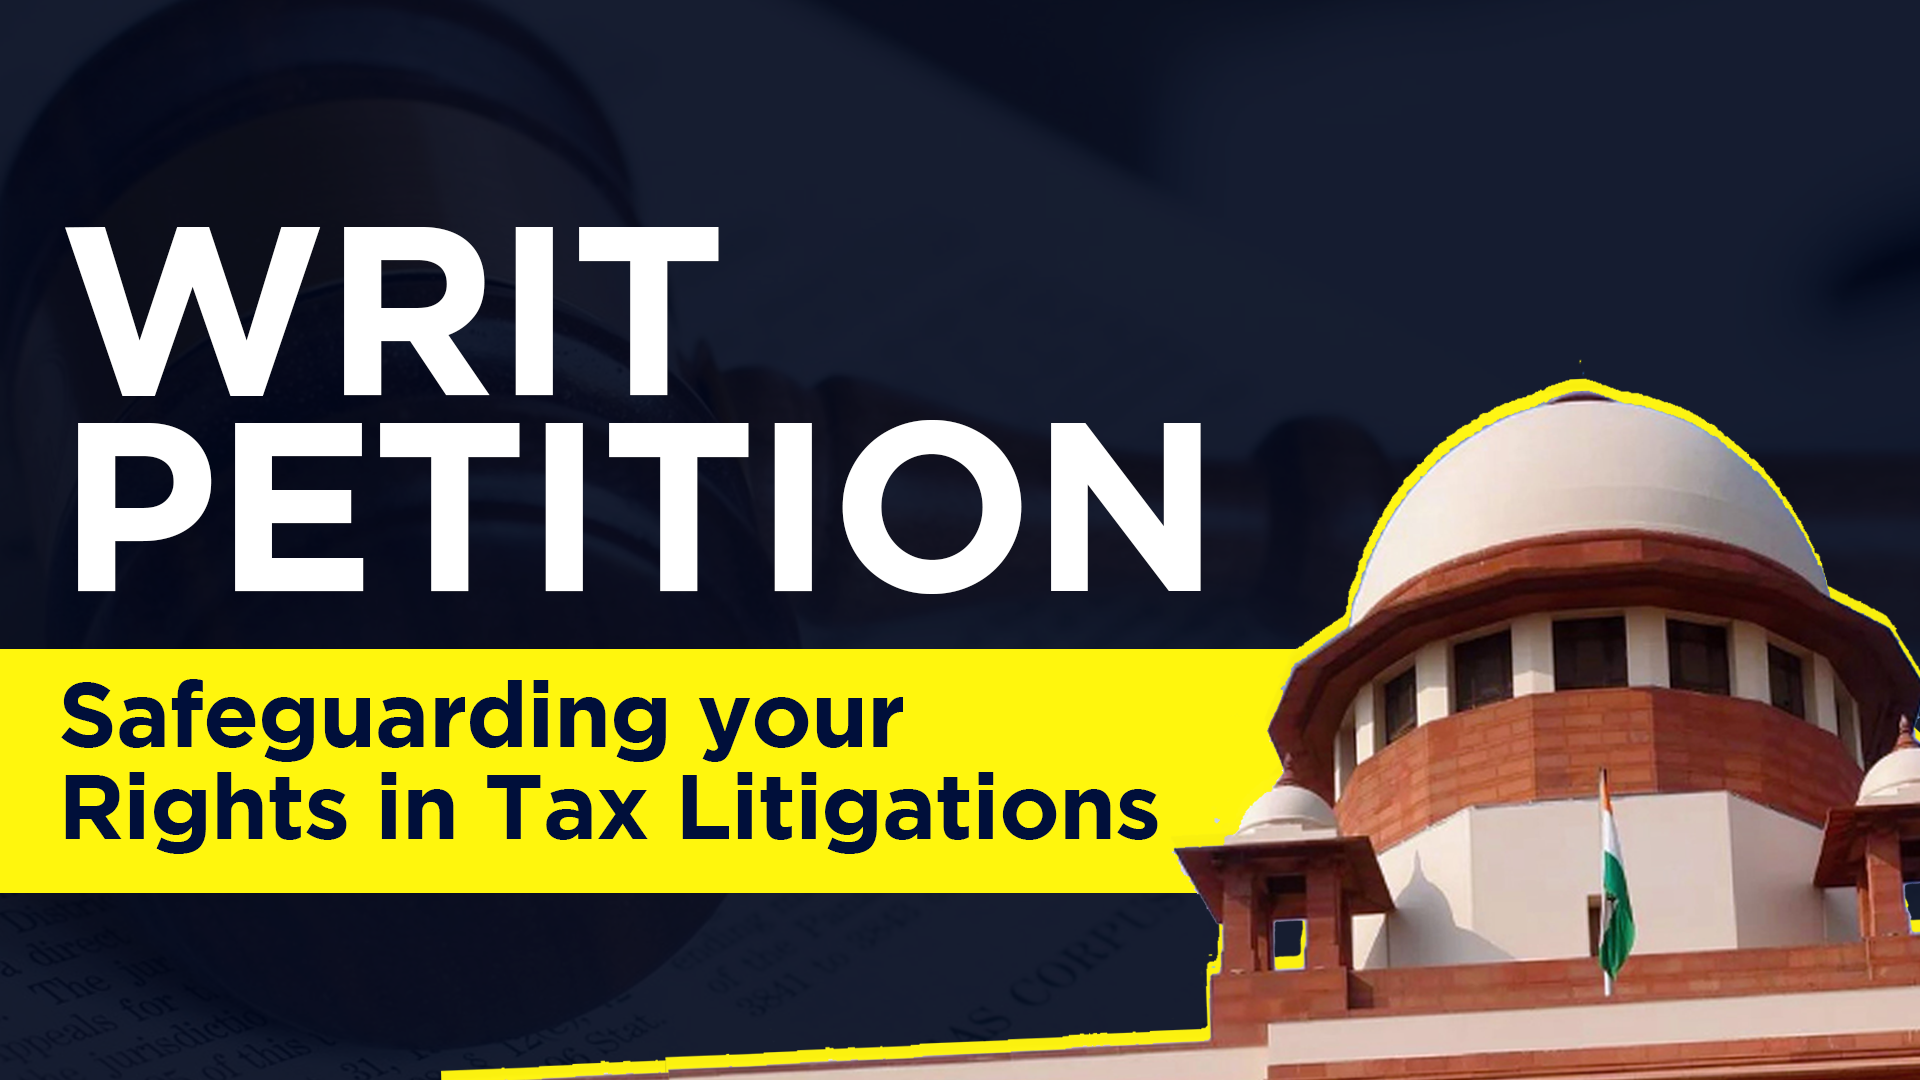 Writ Petitions: Safeguarding your Rights in Tax Litigations